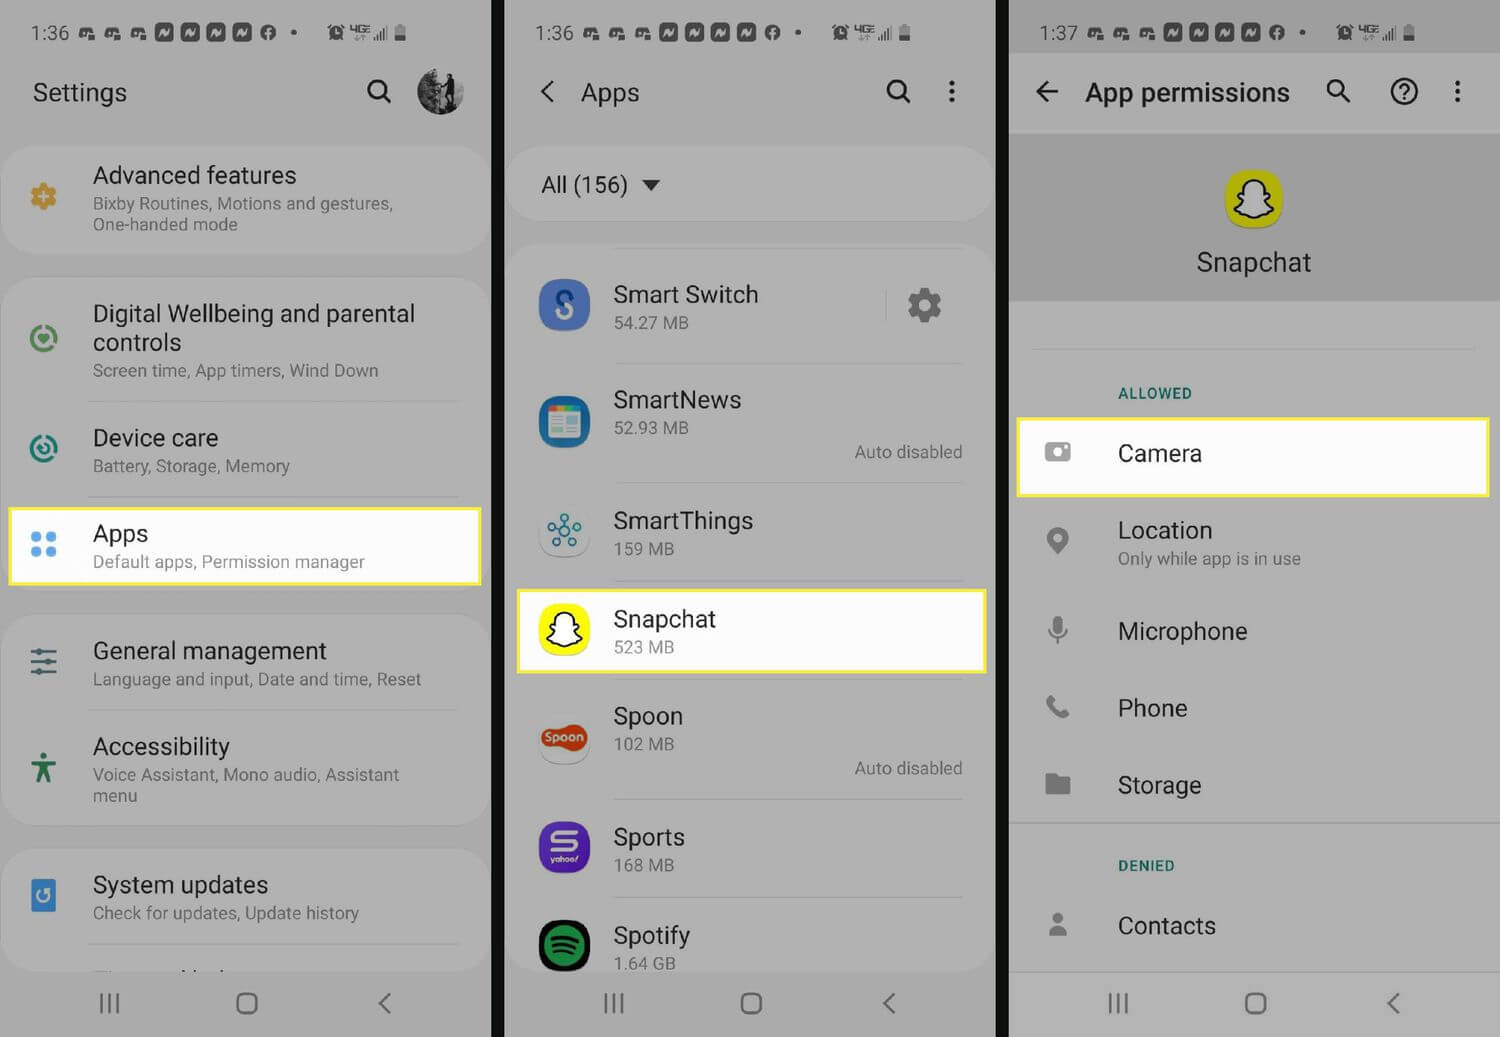 Allow the Camera Permission on Snapchat Android